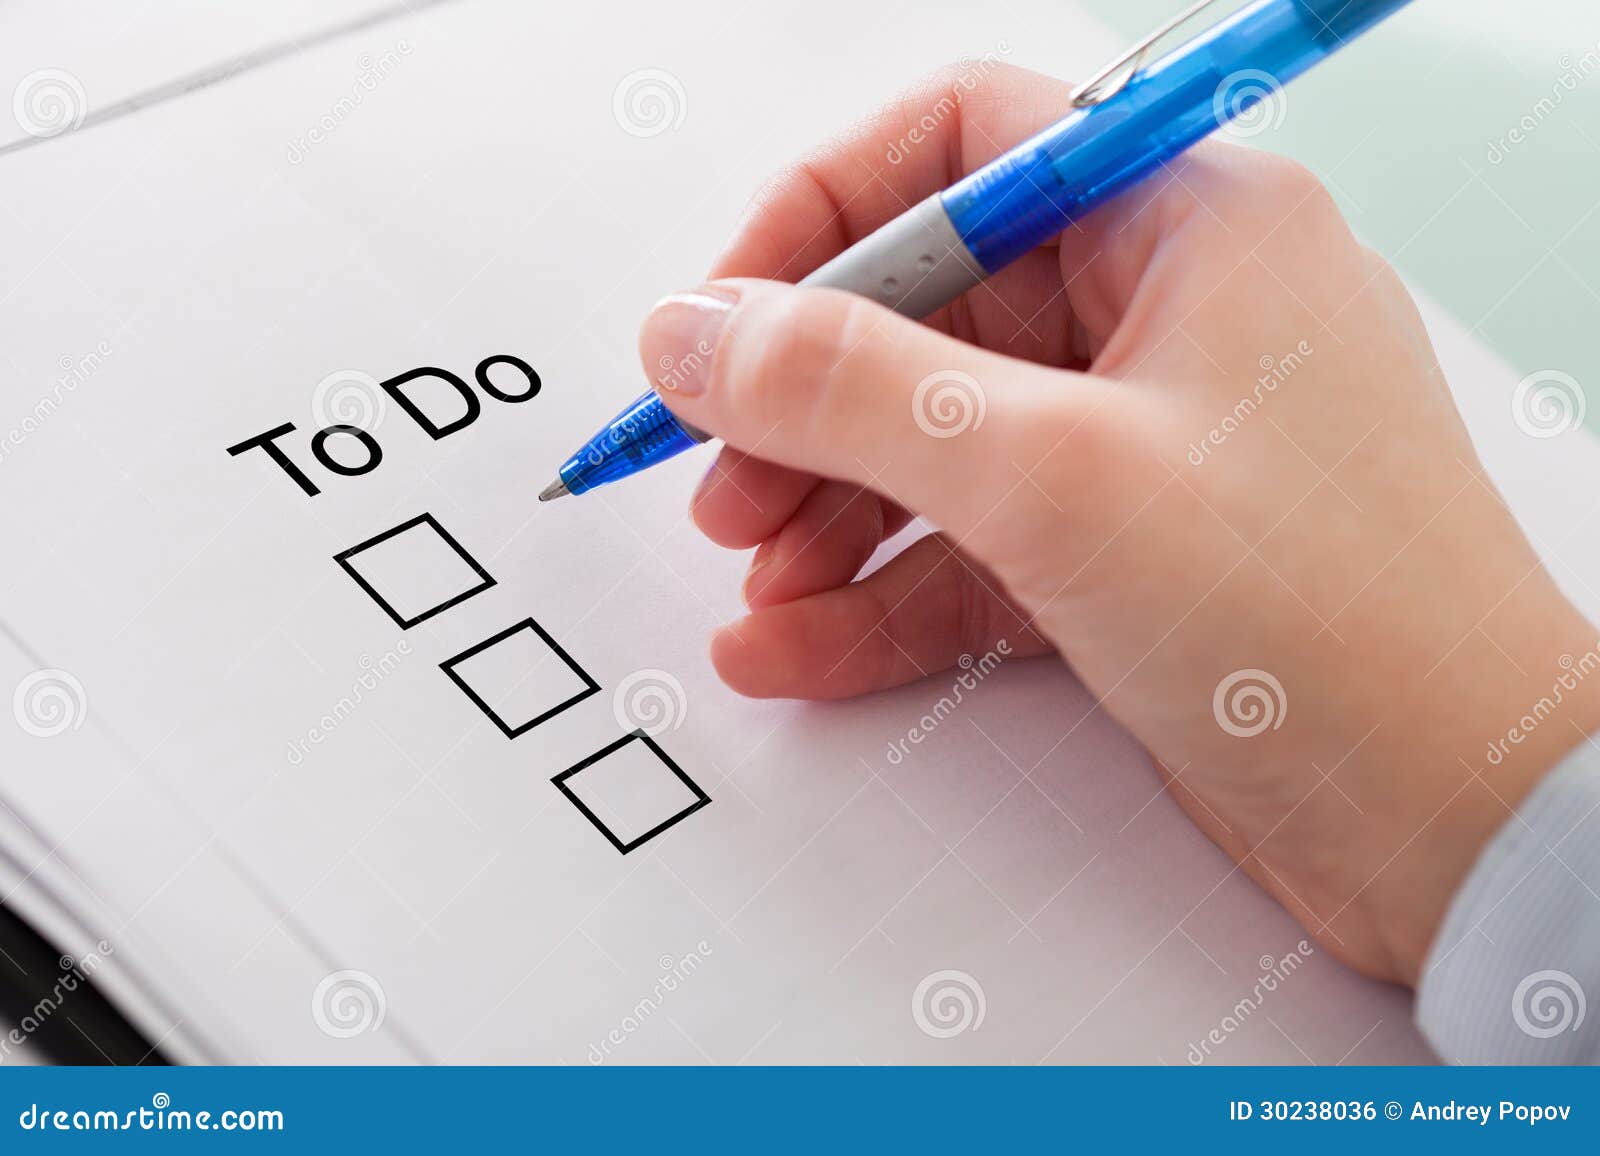 Human Hand Checking To Do List Stock Photo - Image of female